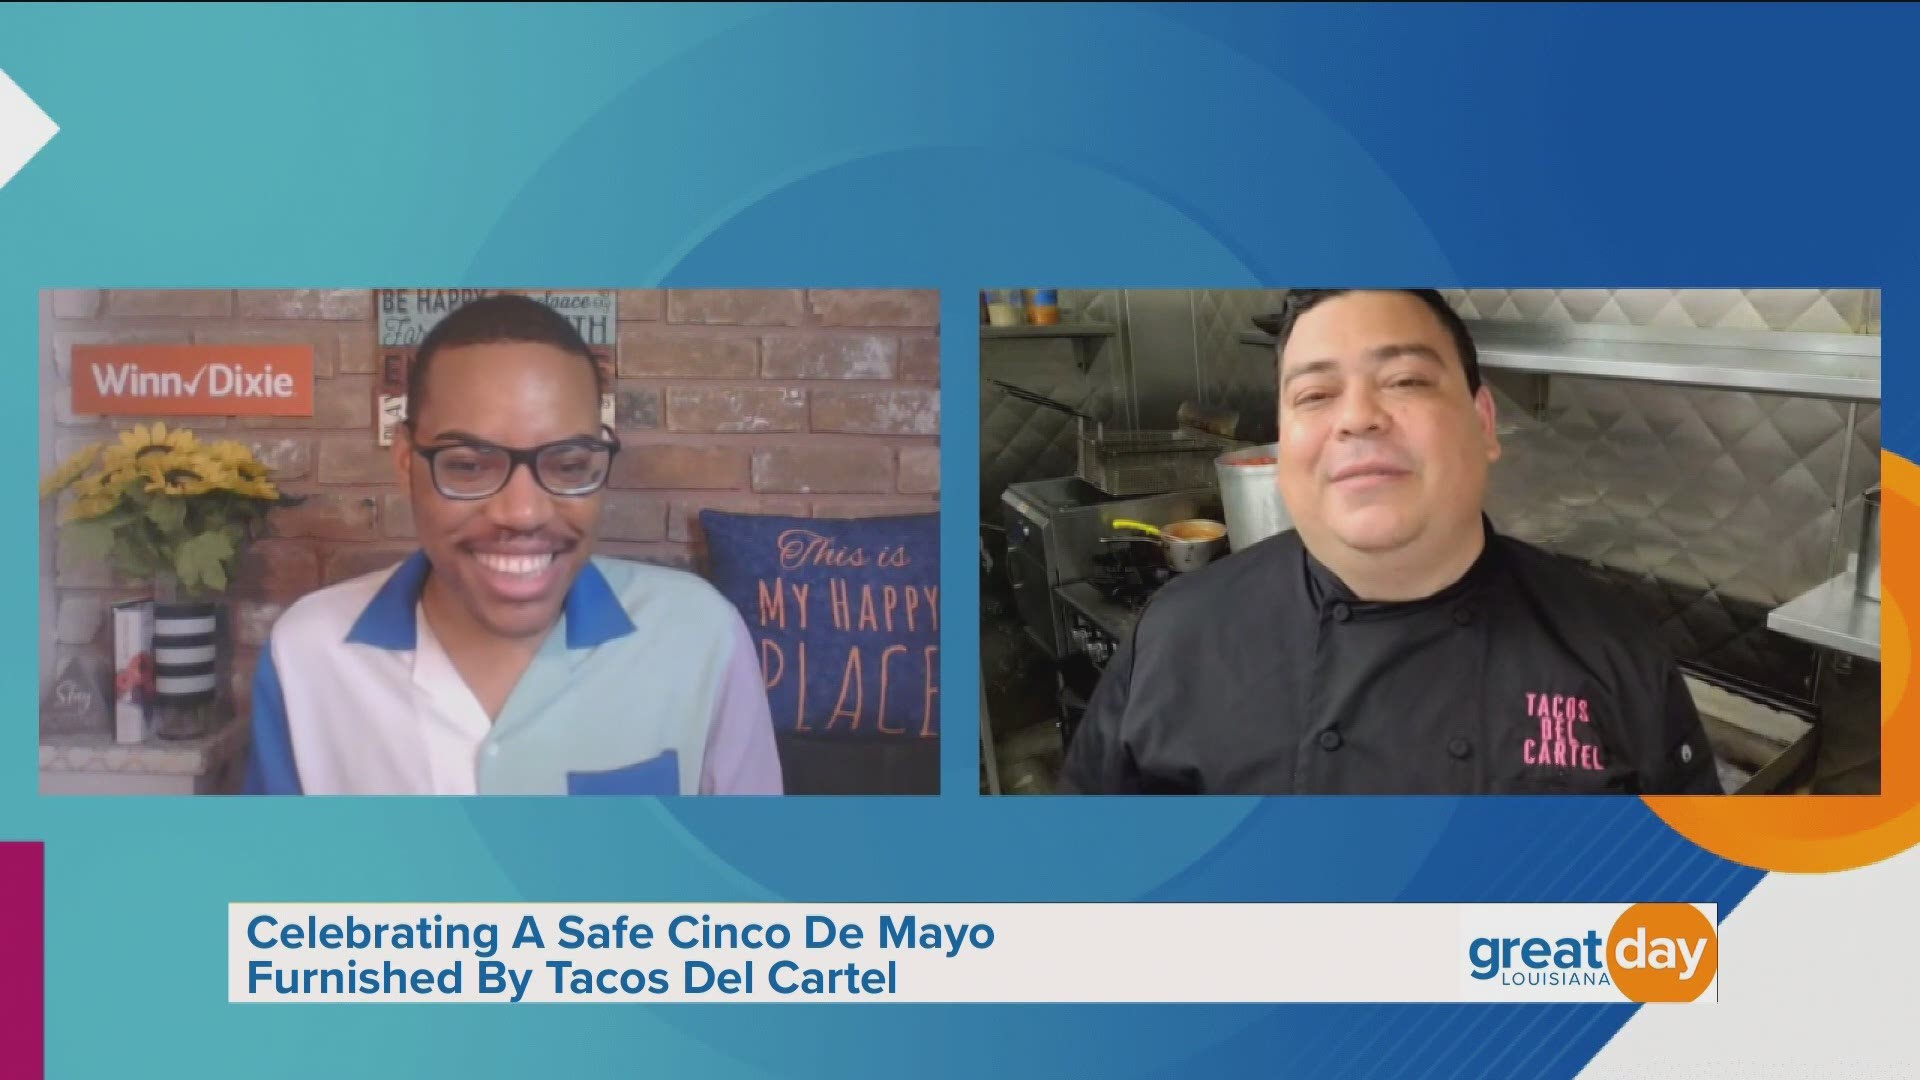 A chef from Tacos del Cartel prepared a taco dish and discussed their upcoming celebration for Cinco de Mayo.